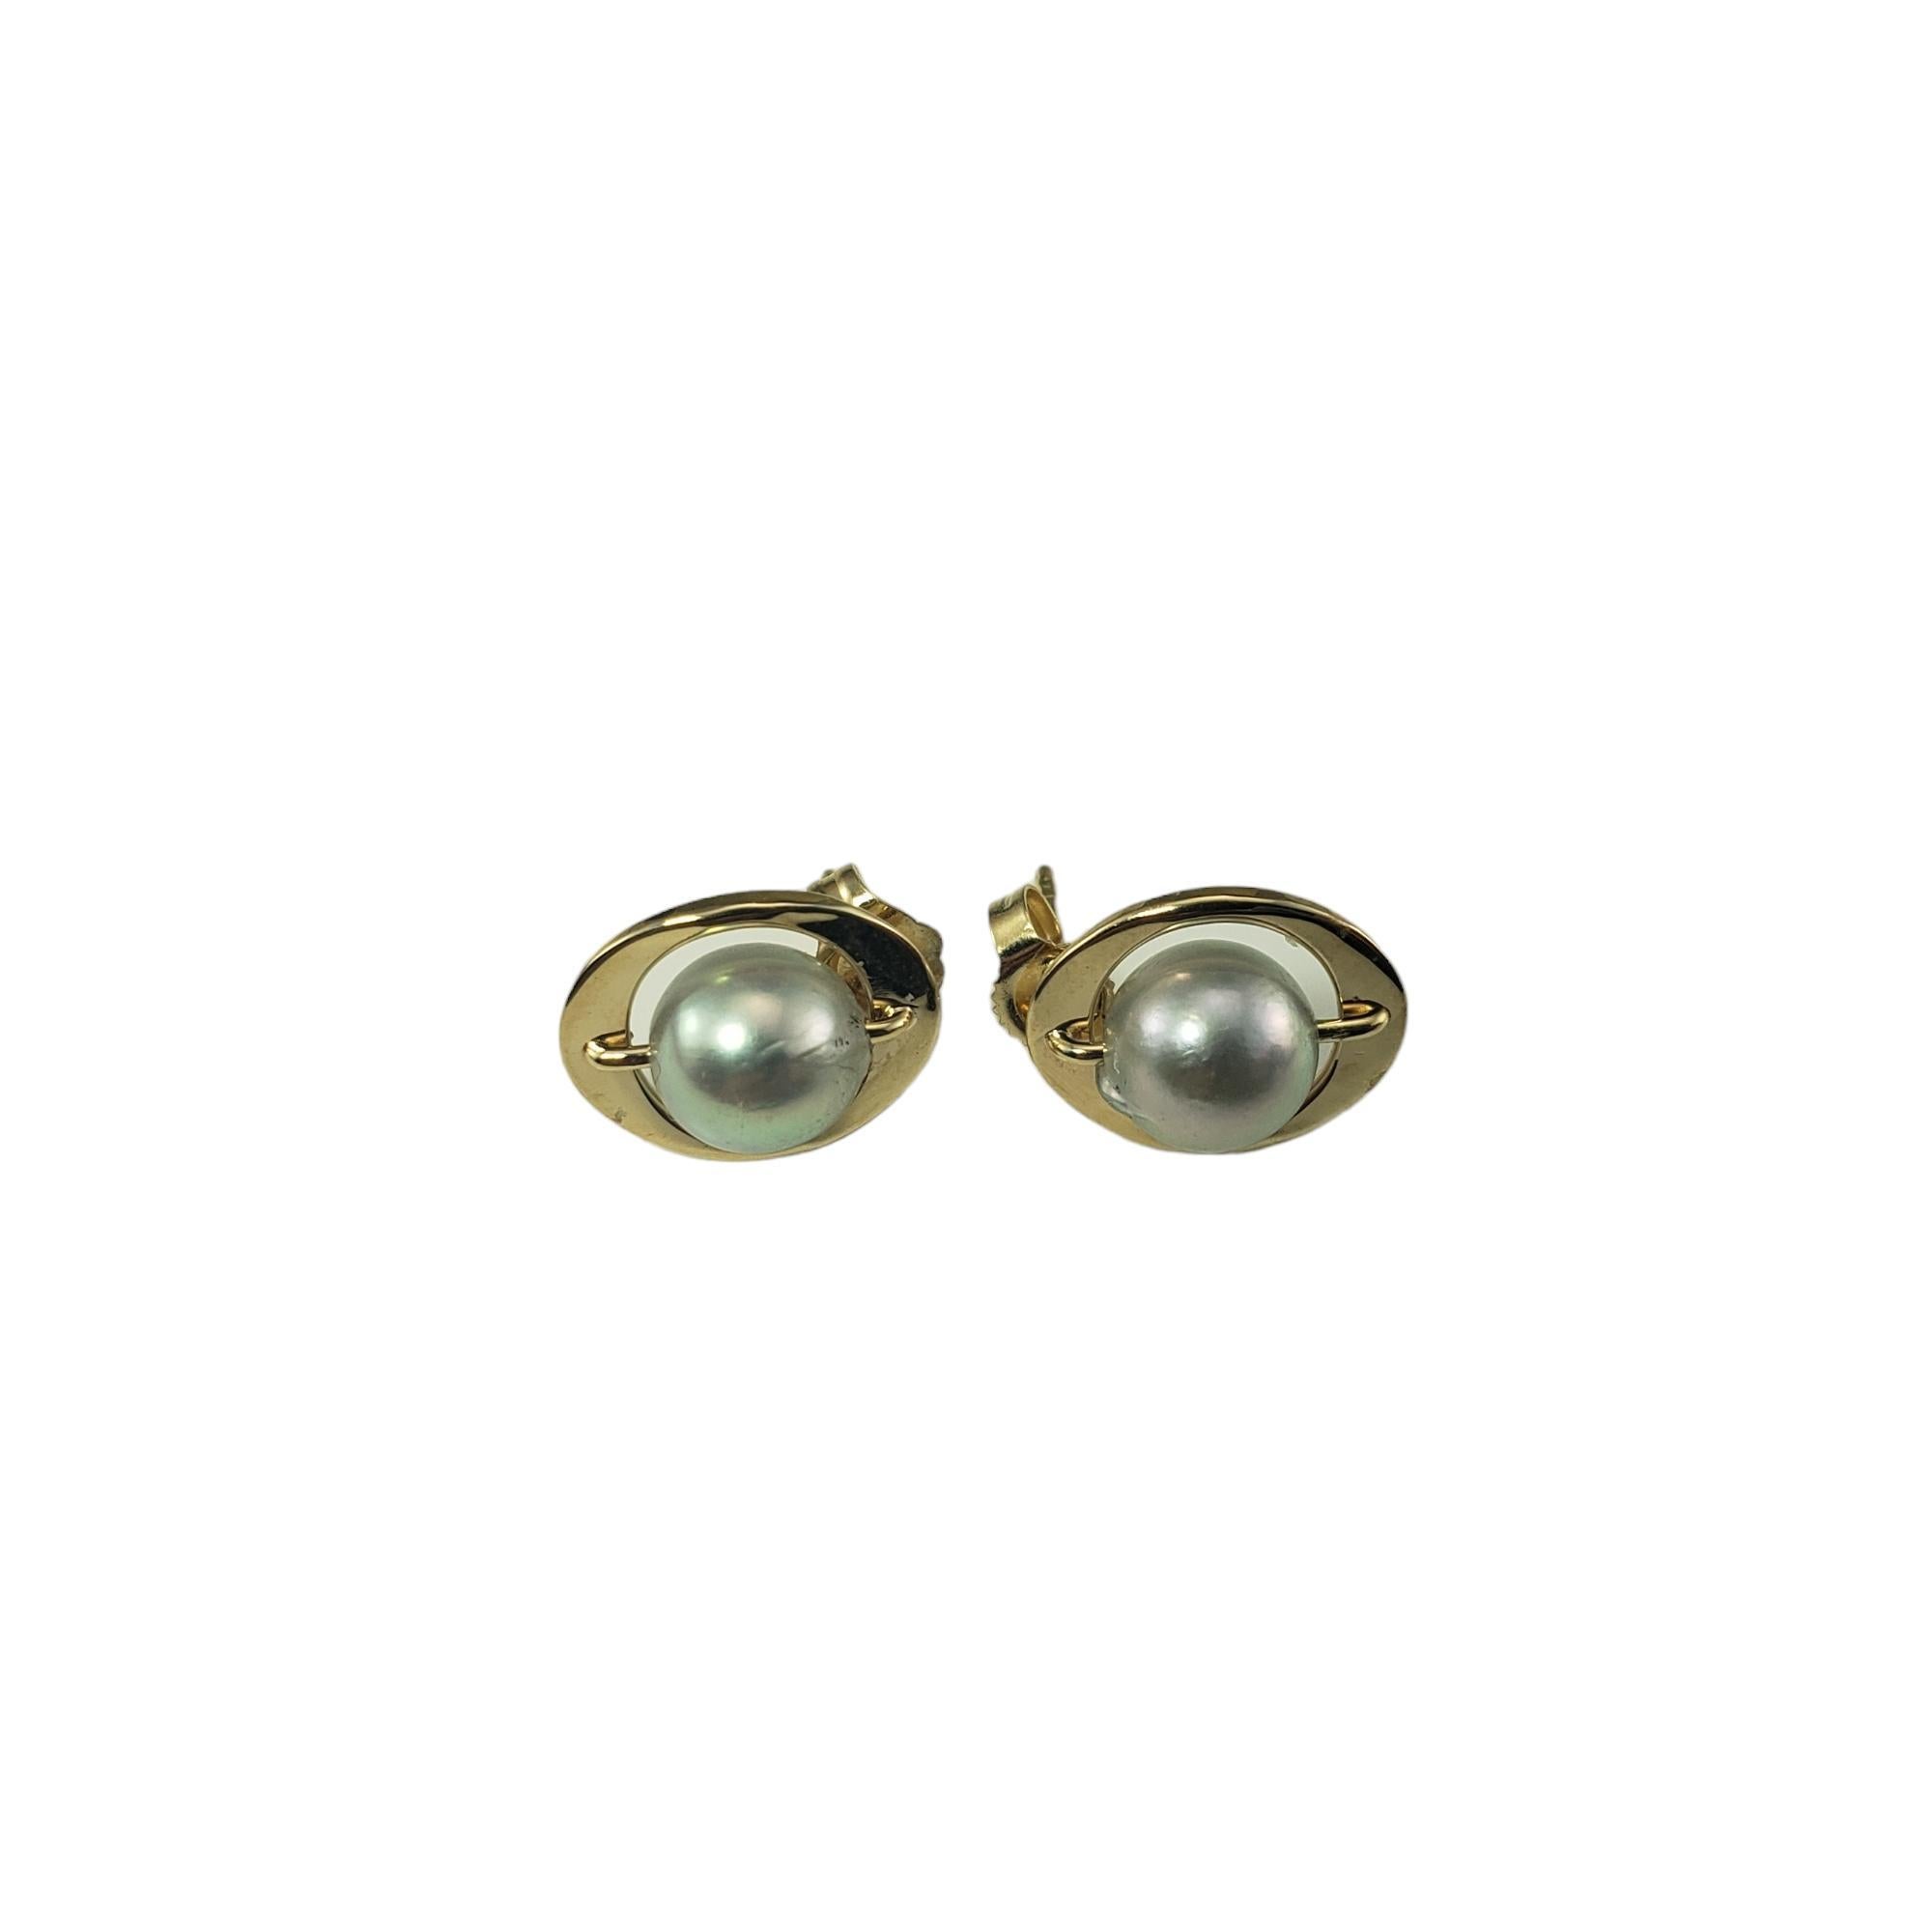 Vintage 14K Yellow Gold and Pearl Earrings-

These elegant earrings each feature one gray pearl (7 mm) set in classic 14K yellow gold.  Push back closures.

Size:  13 mm x 11 mm

Stamped: 14K

Weight: 1.4 dwt. / 2.2 gr.

Very good condition,